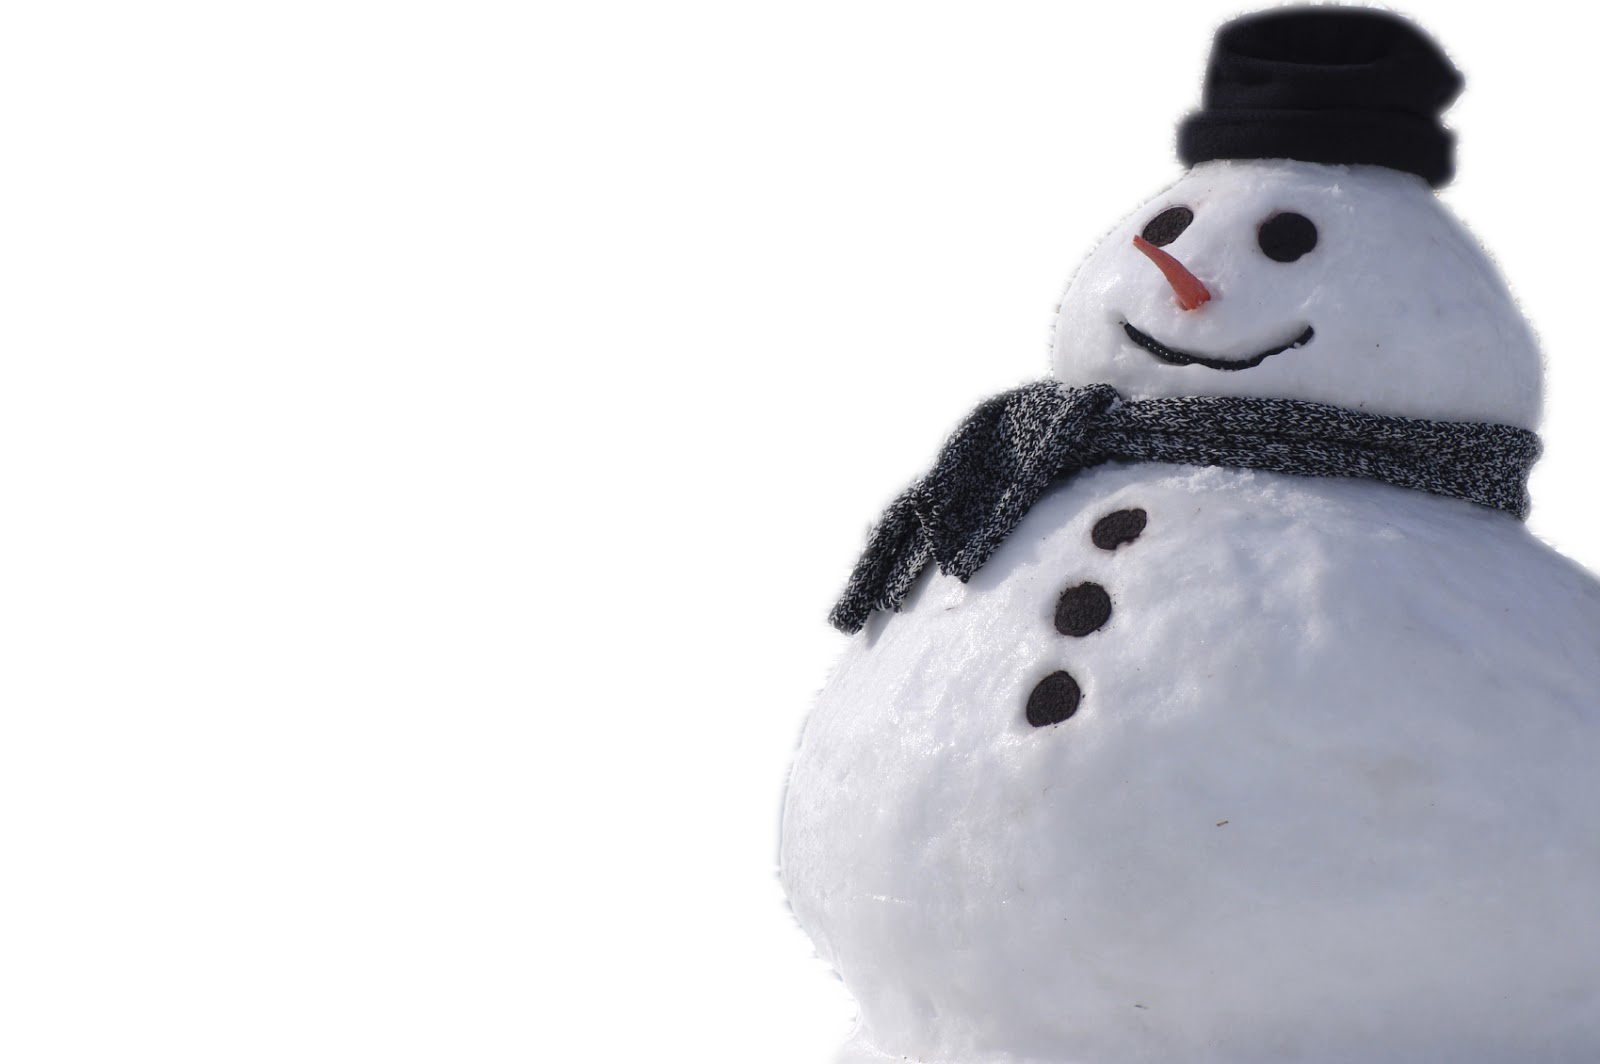 Snowman Background Images HD Pictures and Wallpaper For Free Download   Pngtree